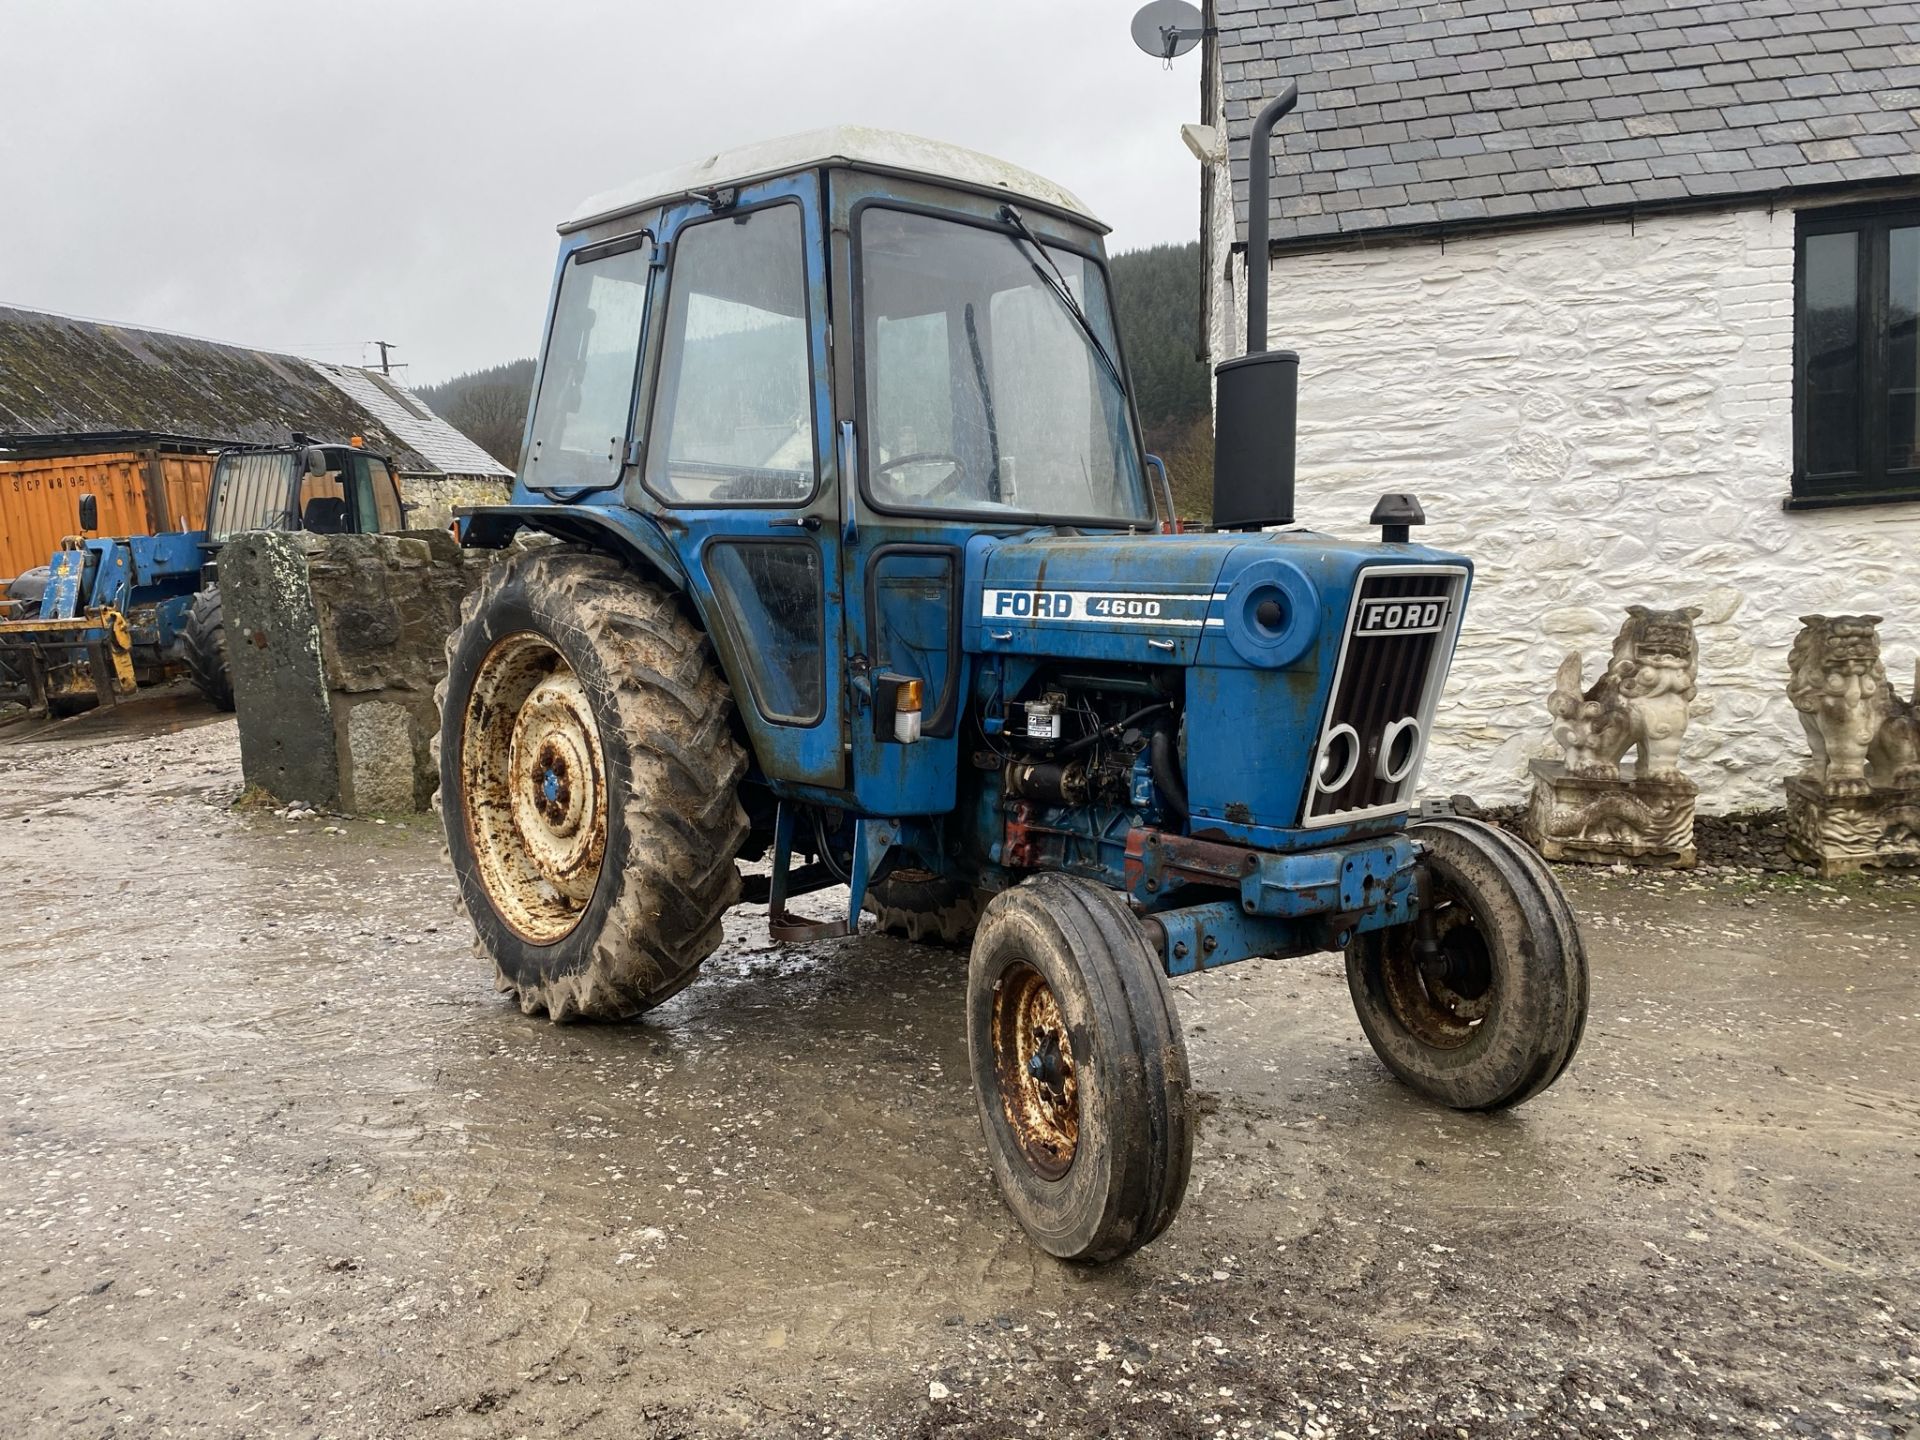 FORD 4600 TRACTOR - Image 7 of 13